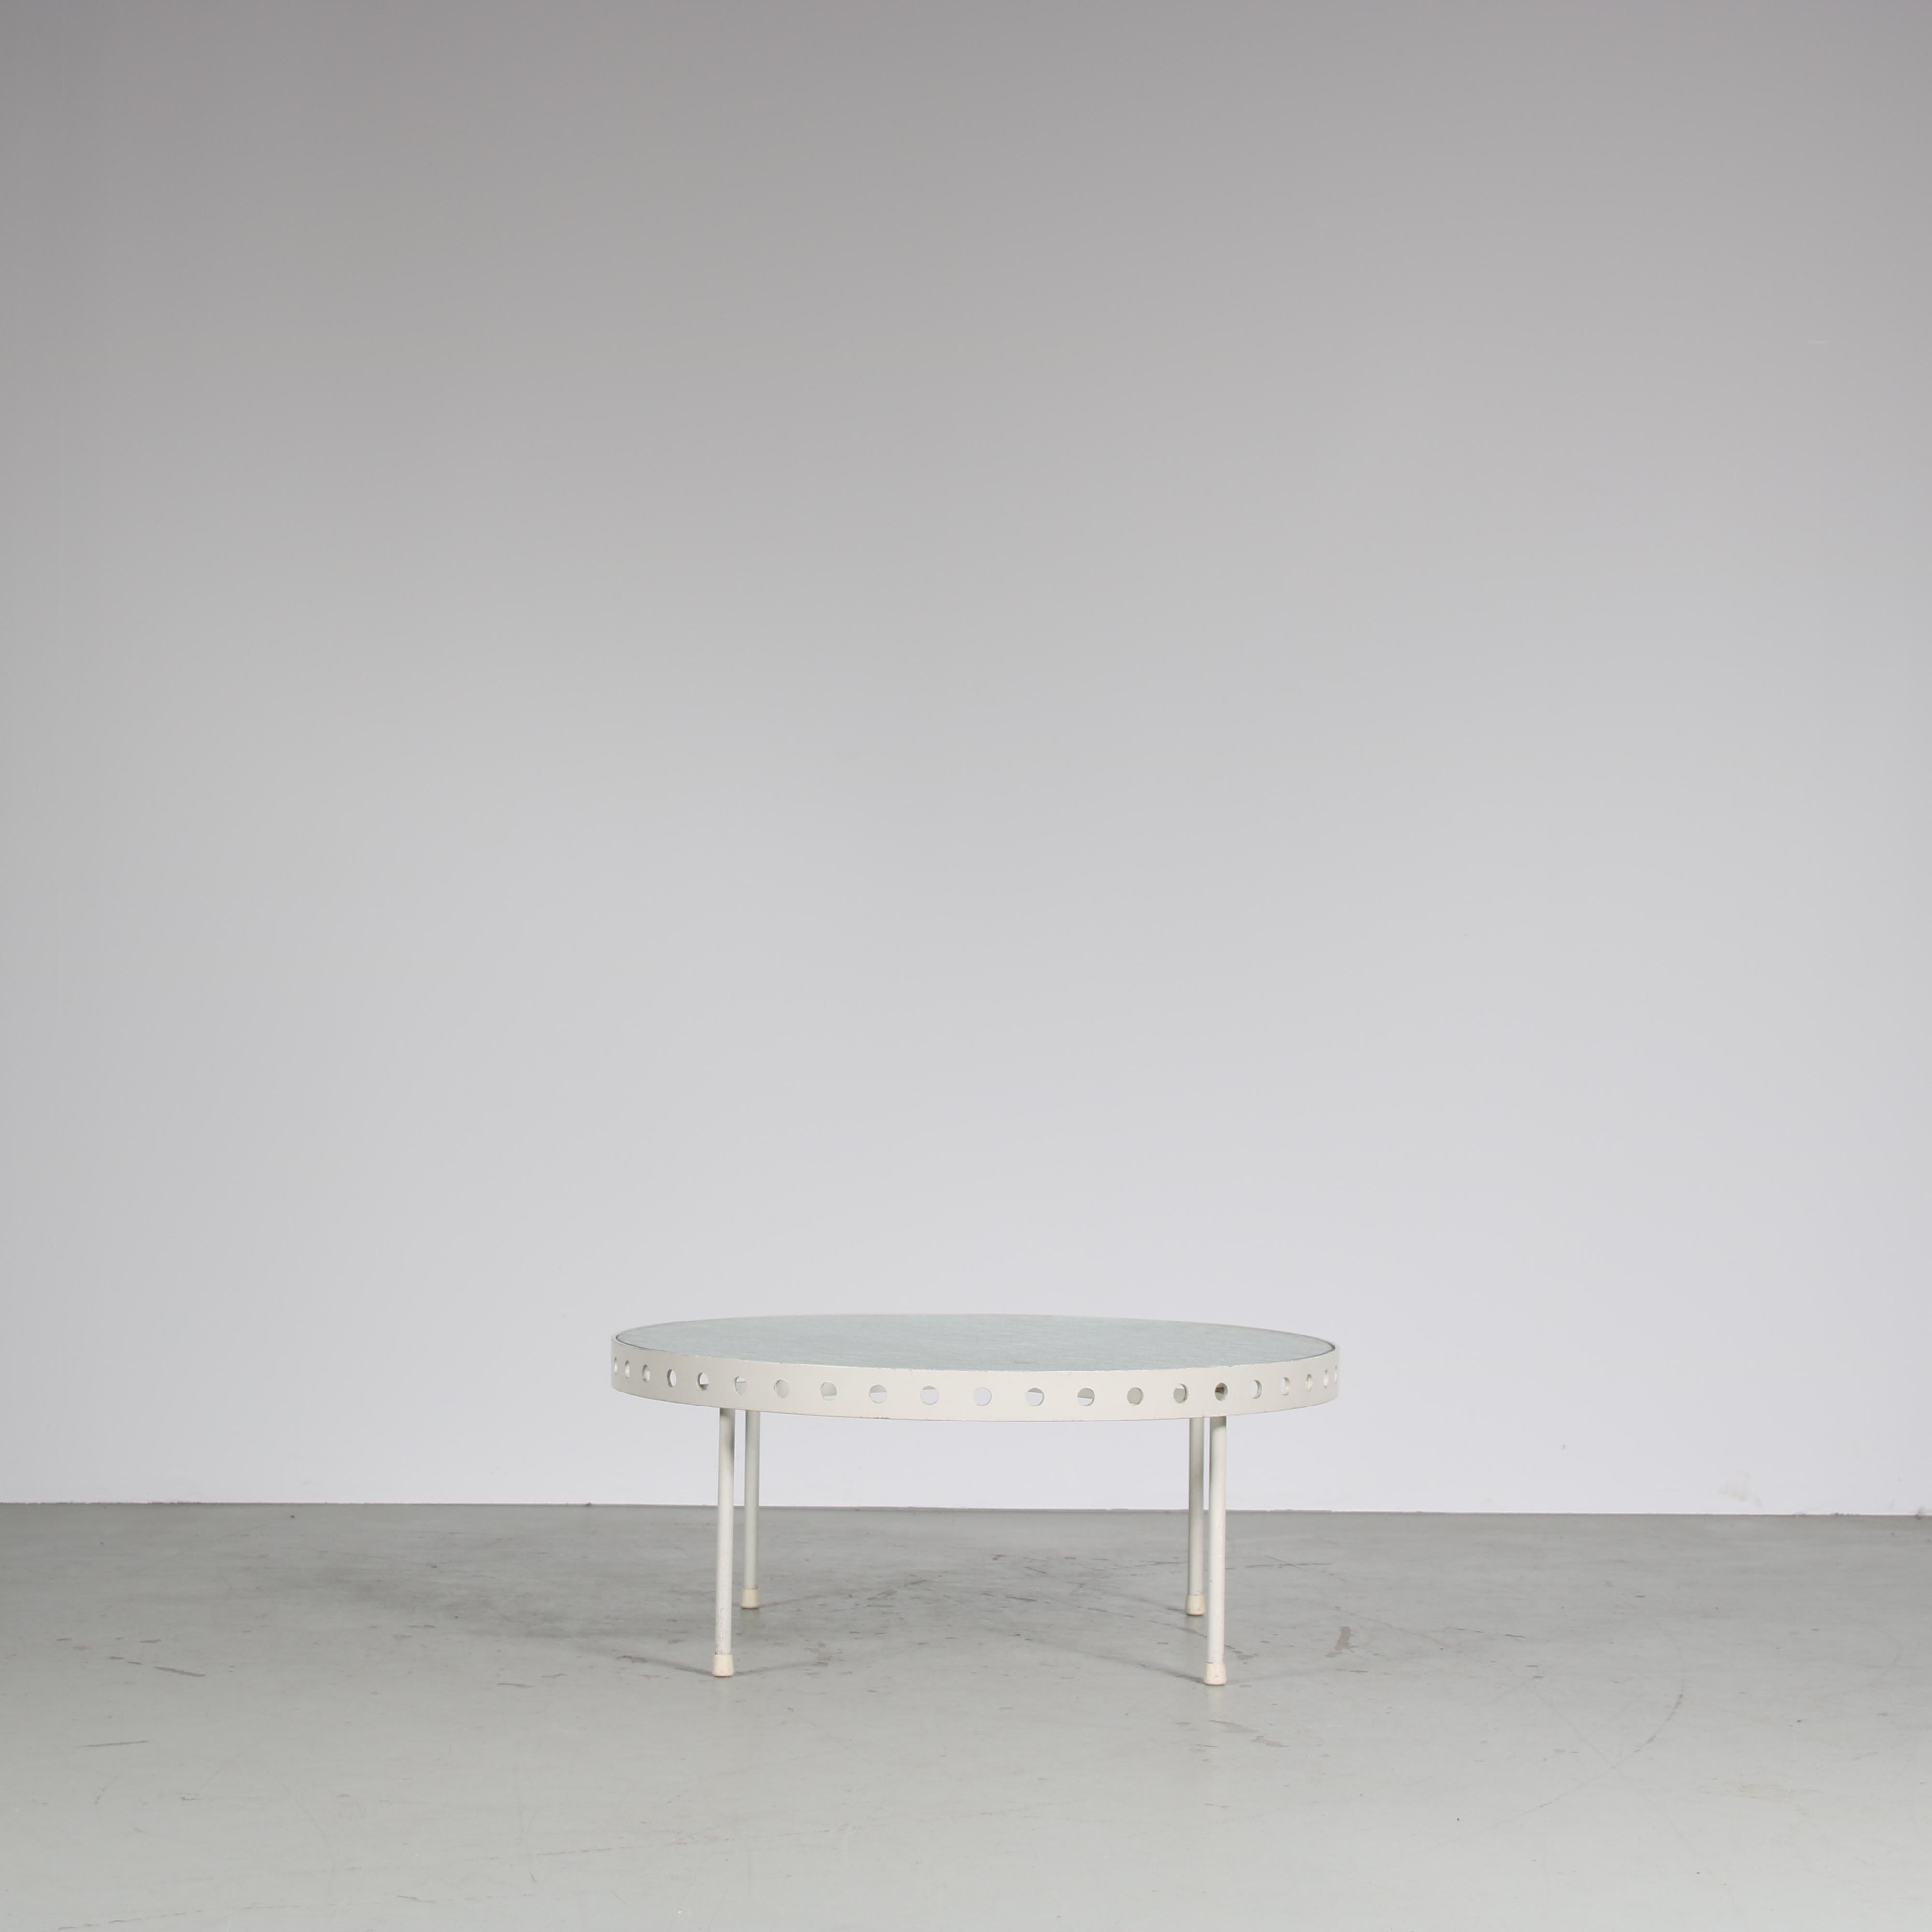 Metal Janni van Pelt Coffee Table for MyHome, Netherlands 1950 For Sale